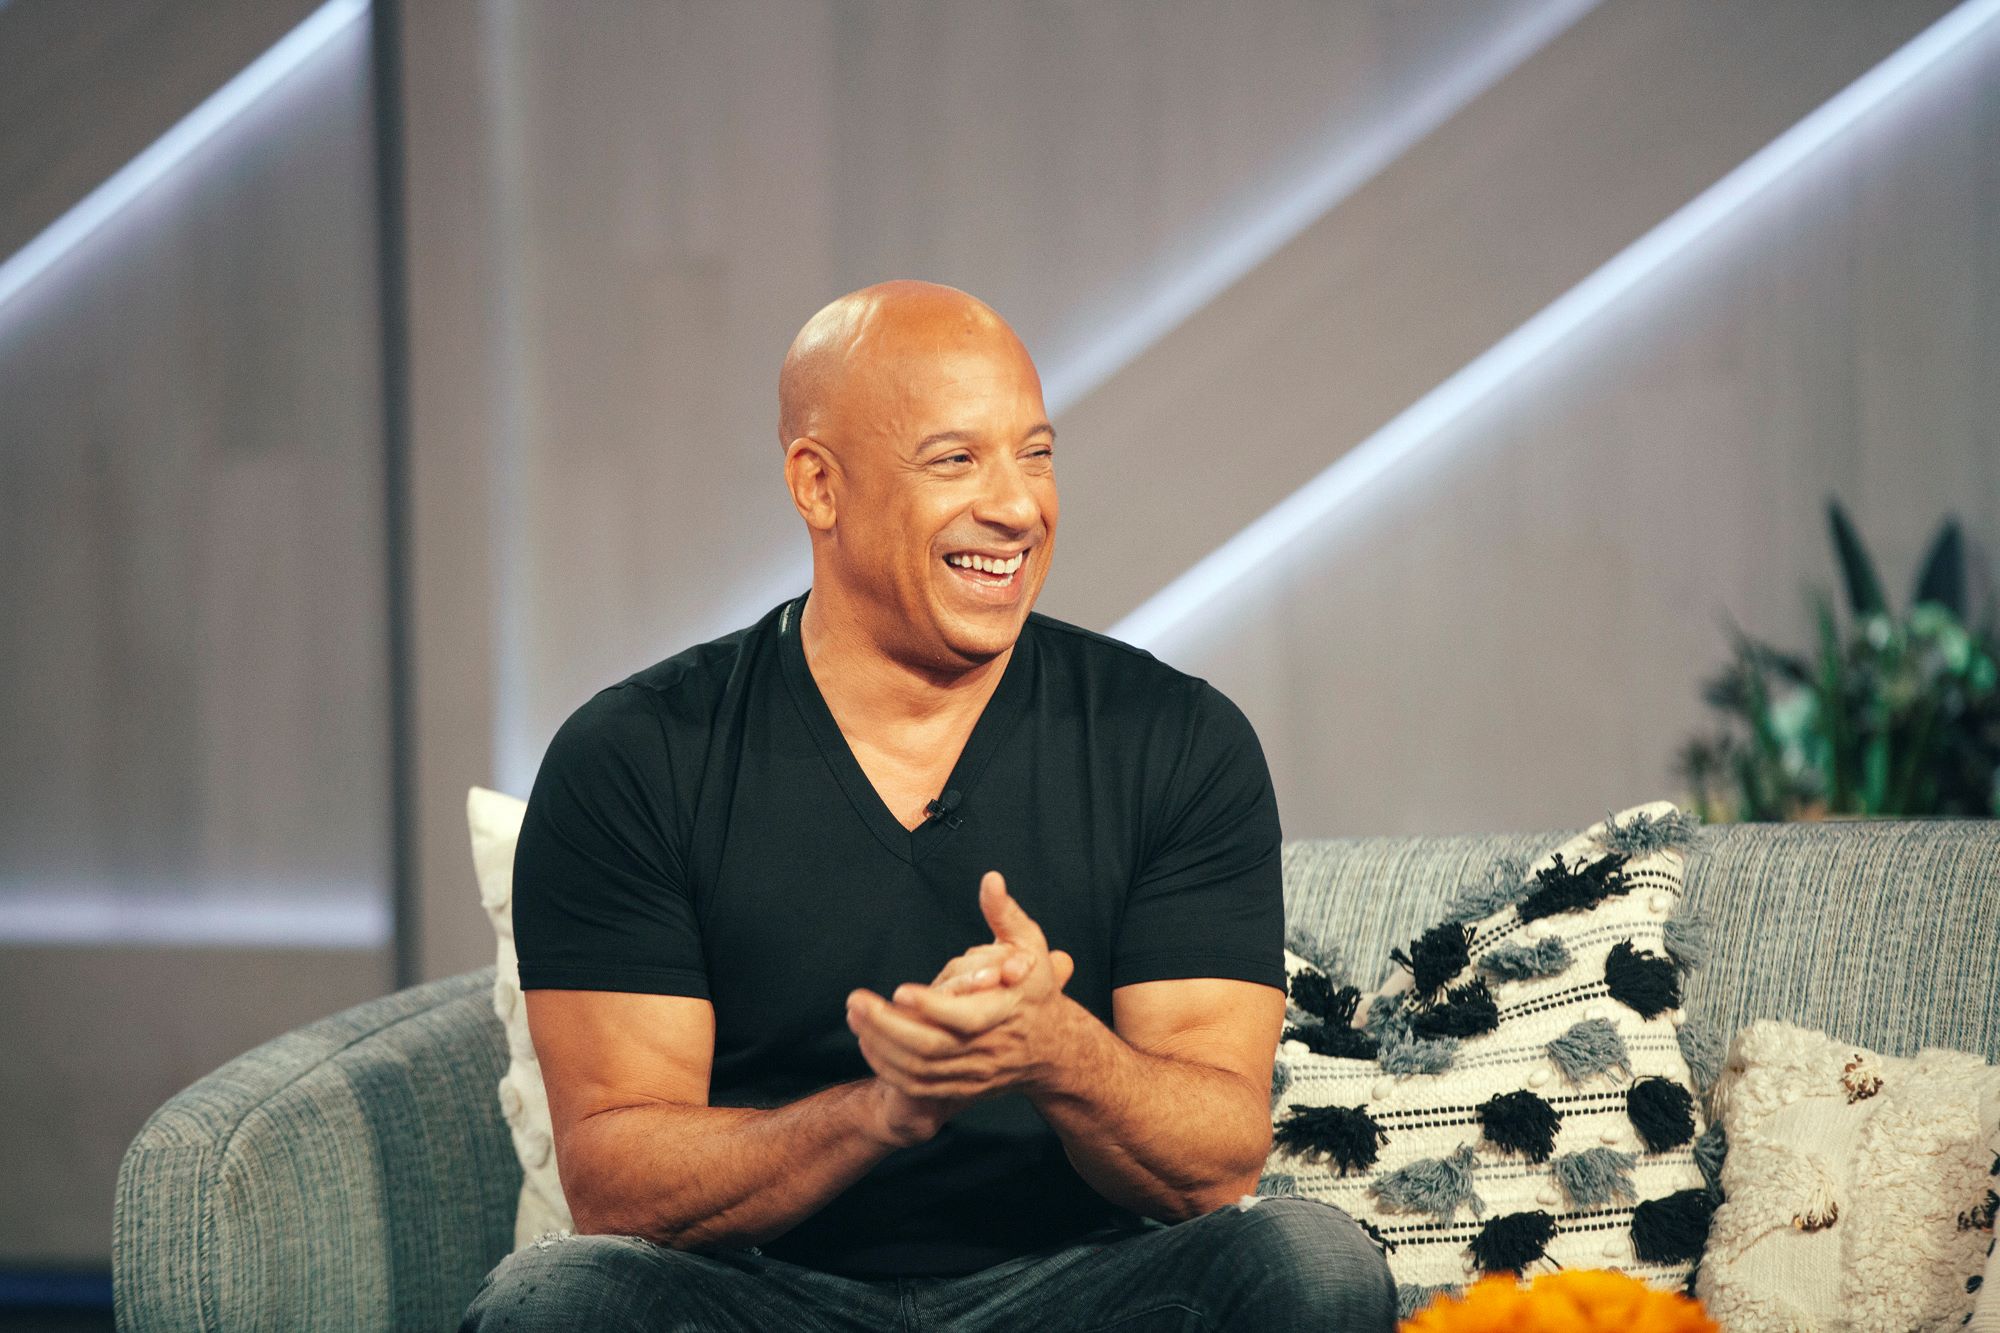 Vin Diesel sitting on a couch on the set of a talk show